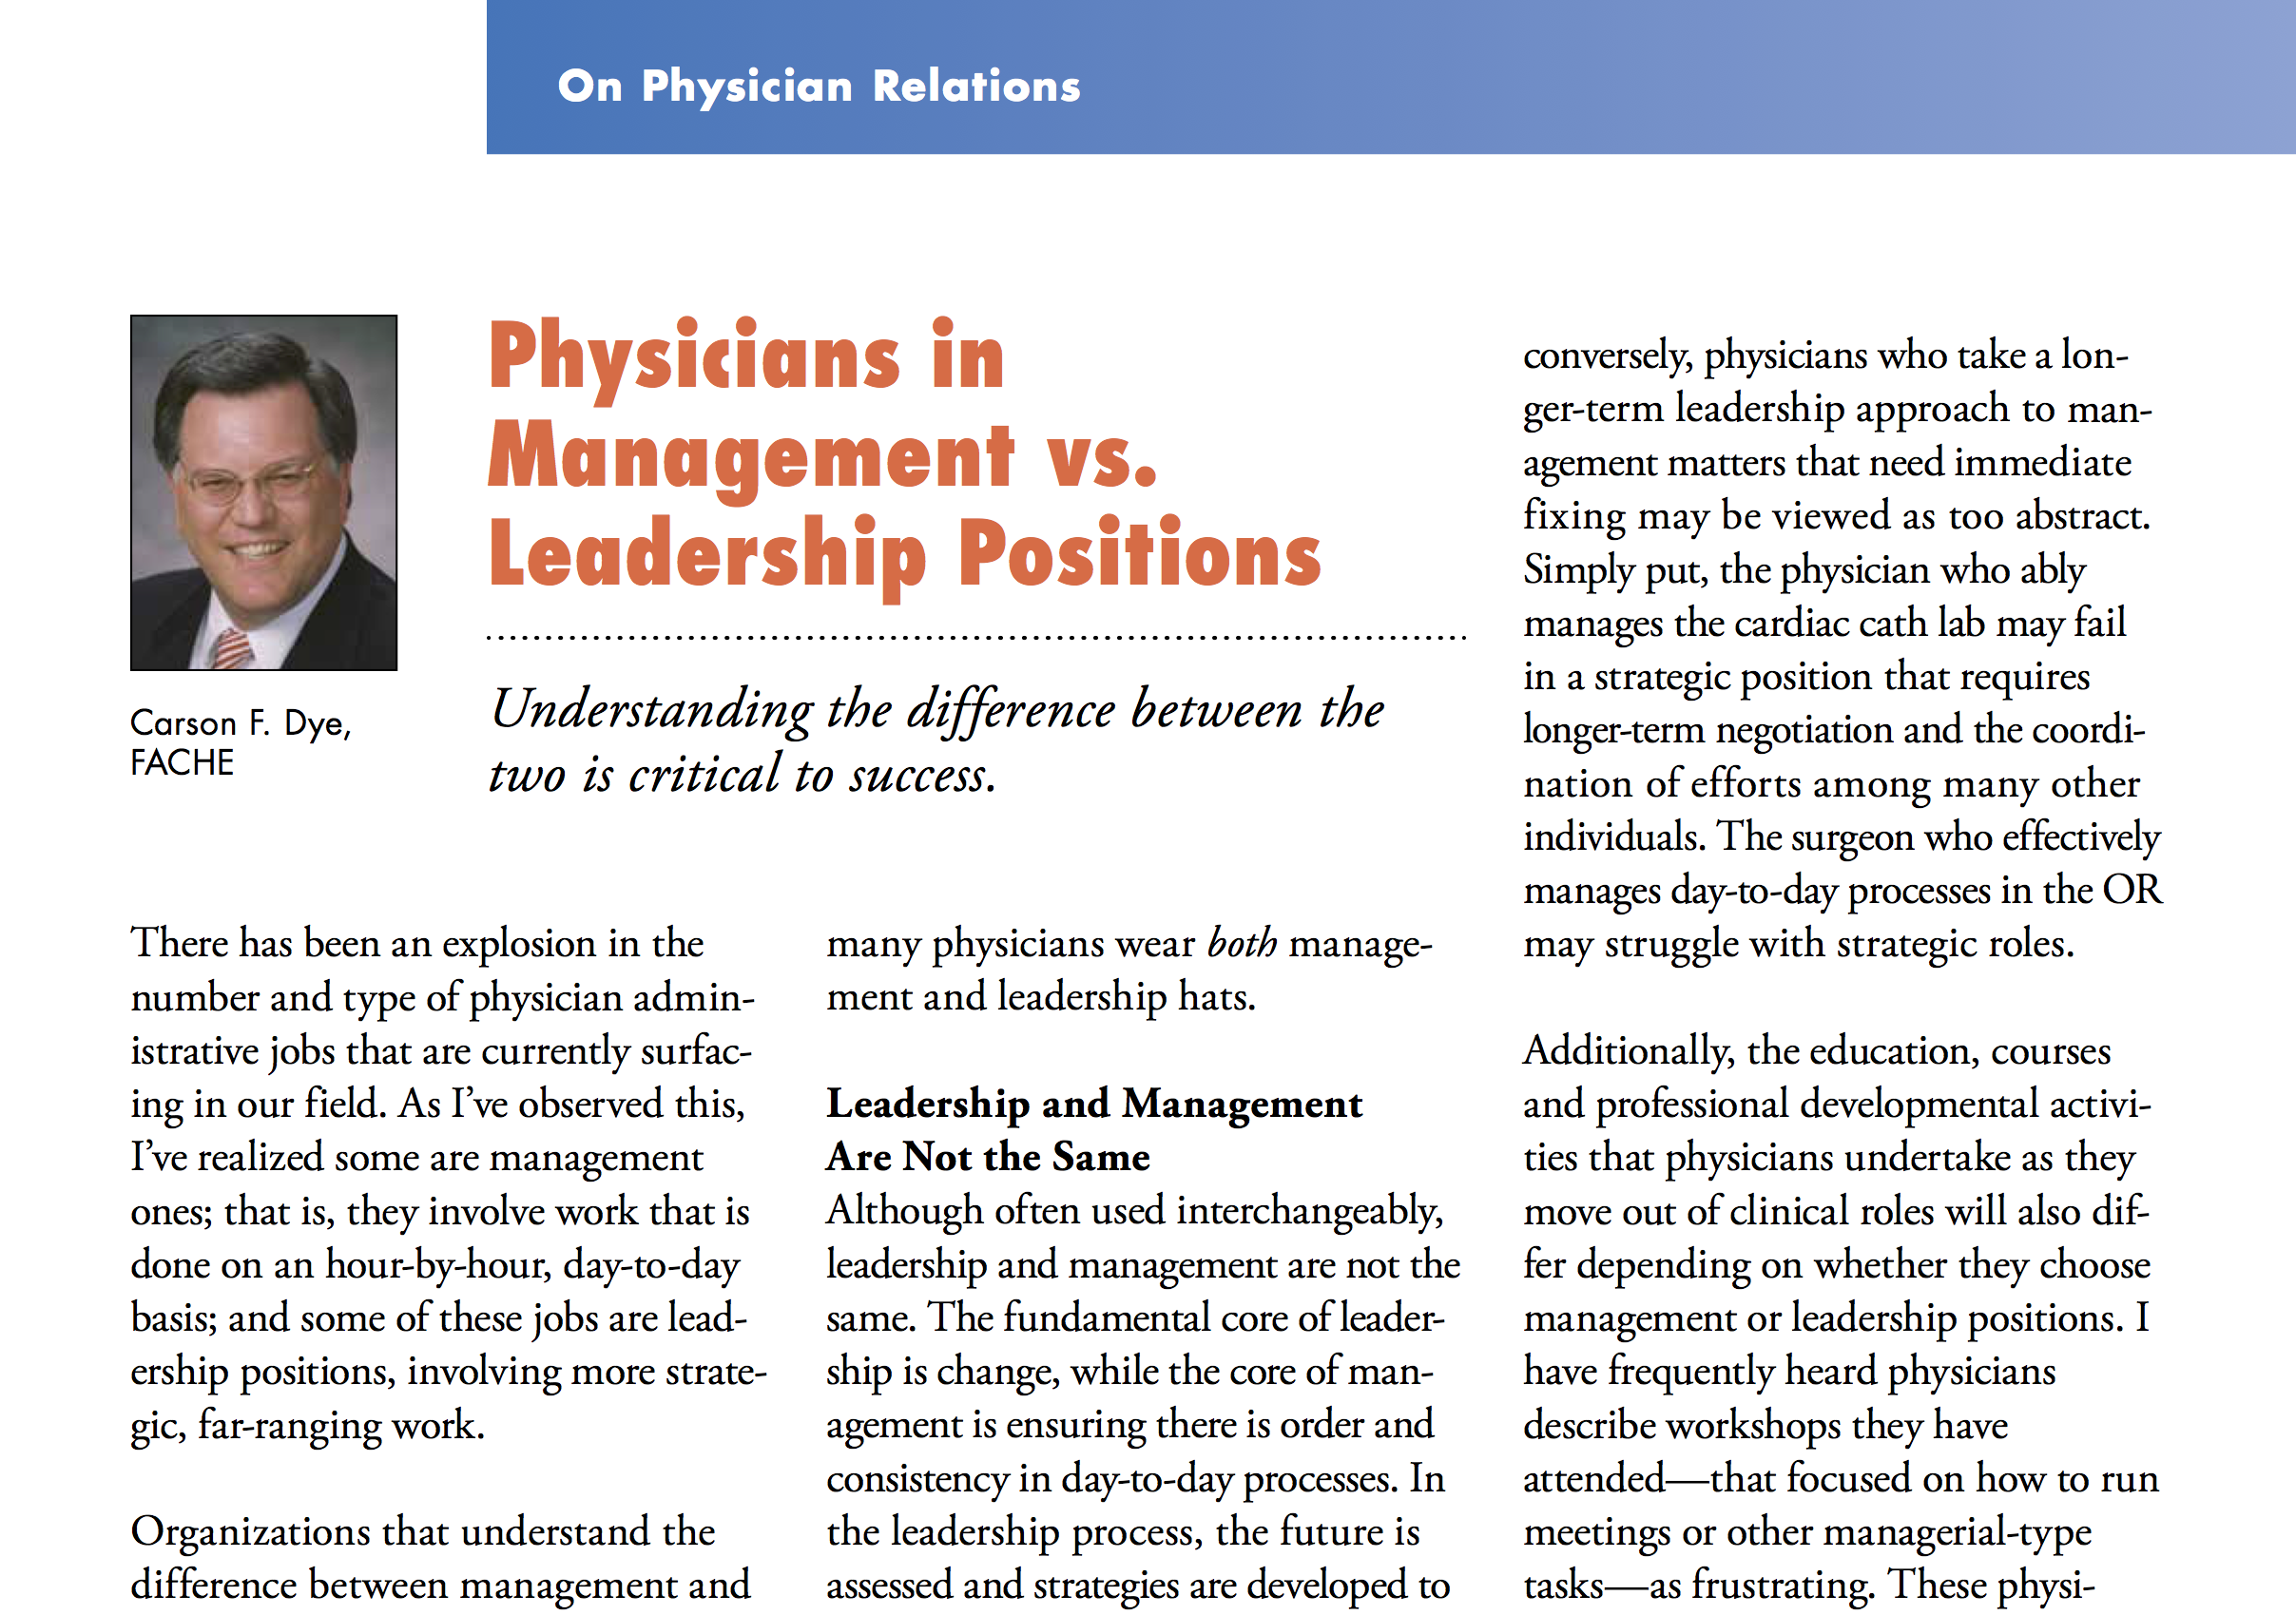 Reprinted from Healthcare Executive SEPT/OCT 2014 - Physicians in Management vs. Leadership Positions